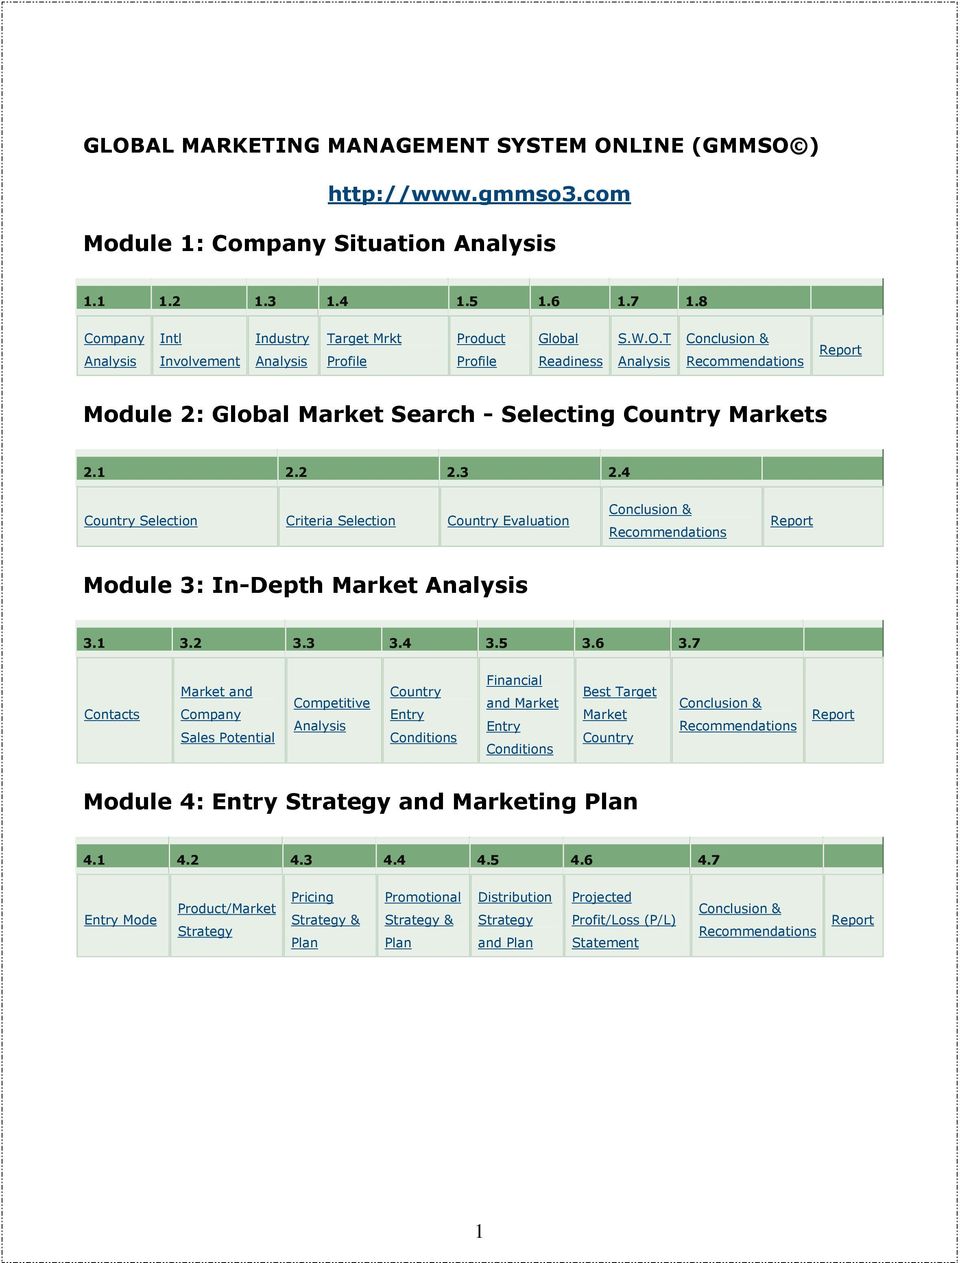 T Analysis Conclusion & Recommendations Report Module 2: Global Market Search - Selecting Country Markets 2.1 2.2 2.3 2.